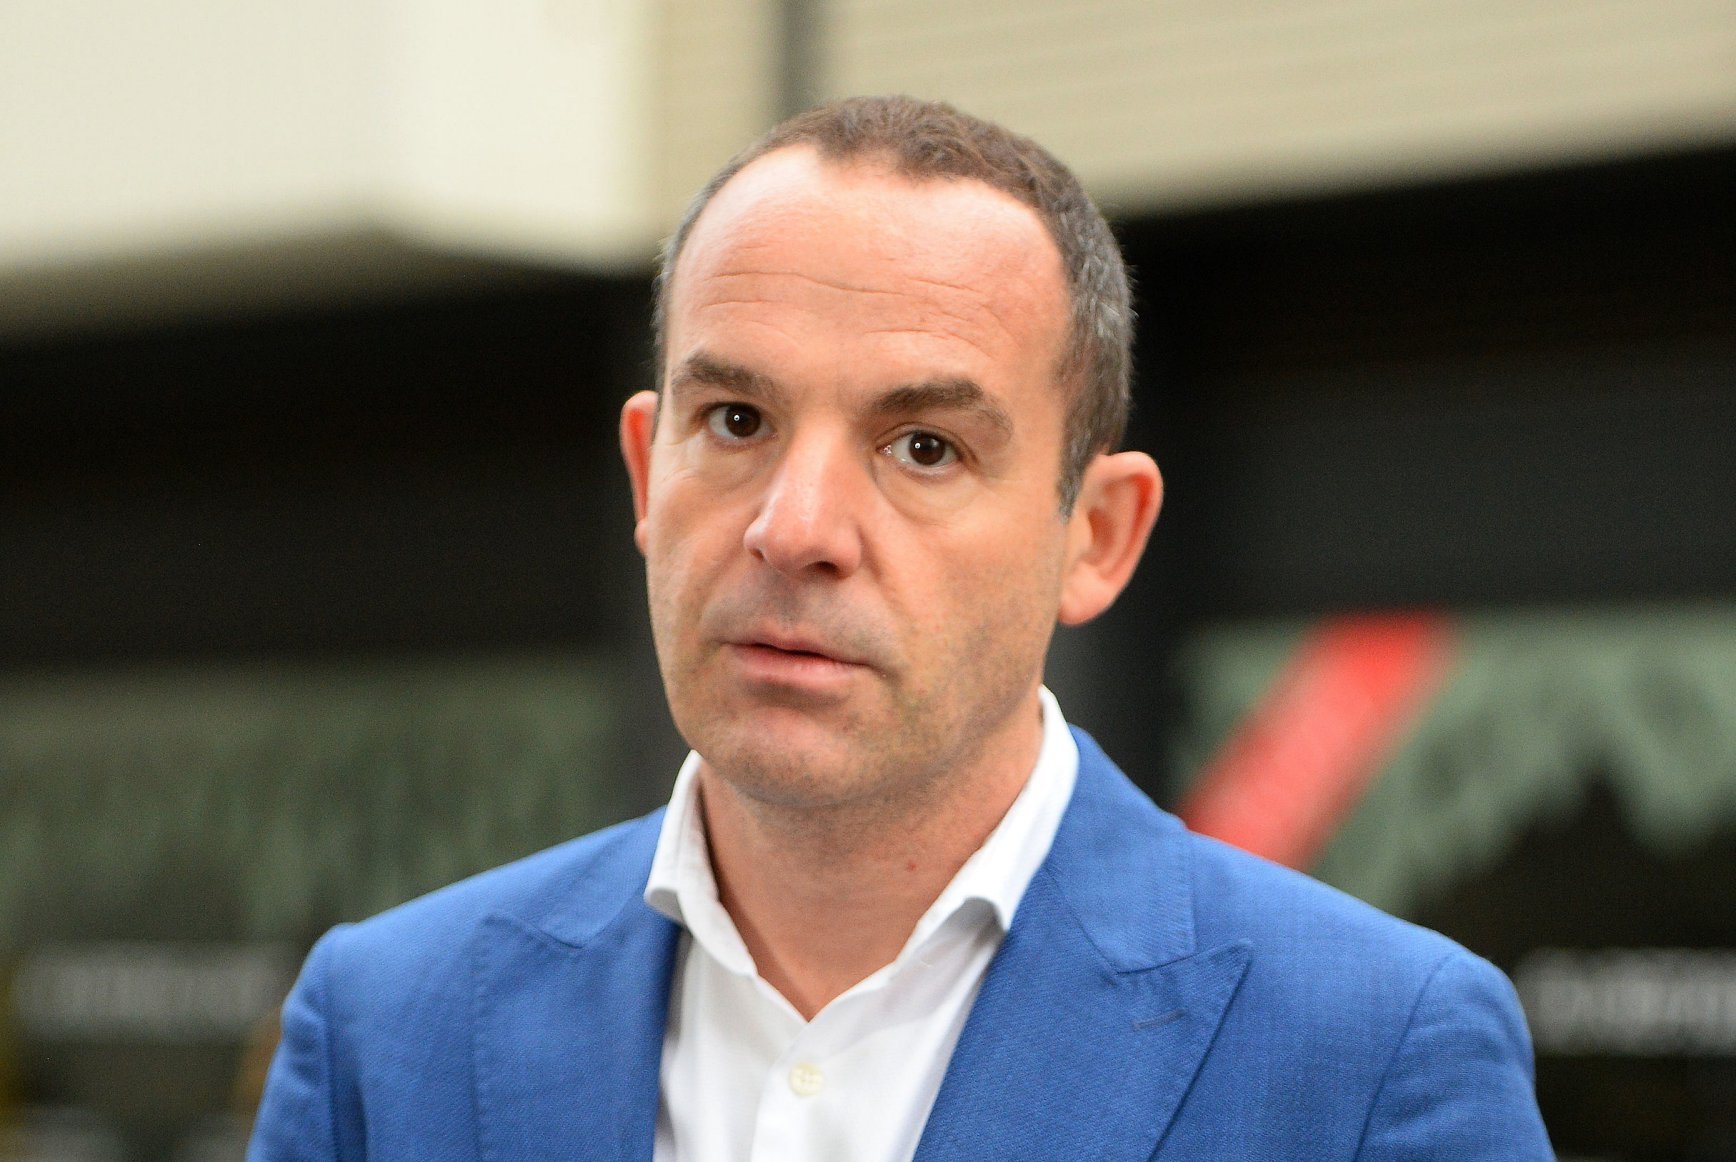 Martin Lewis: Student loan changes amount to ‘lifelong graduate tax’ with grads to pay ‘into their 60s’